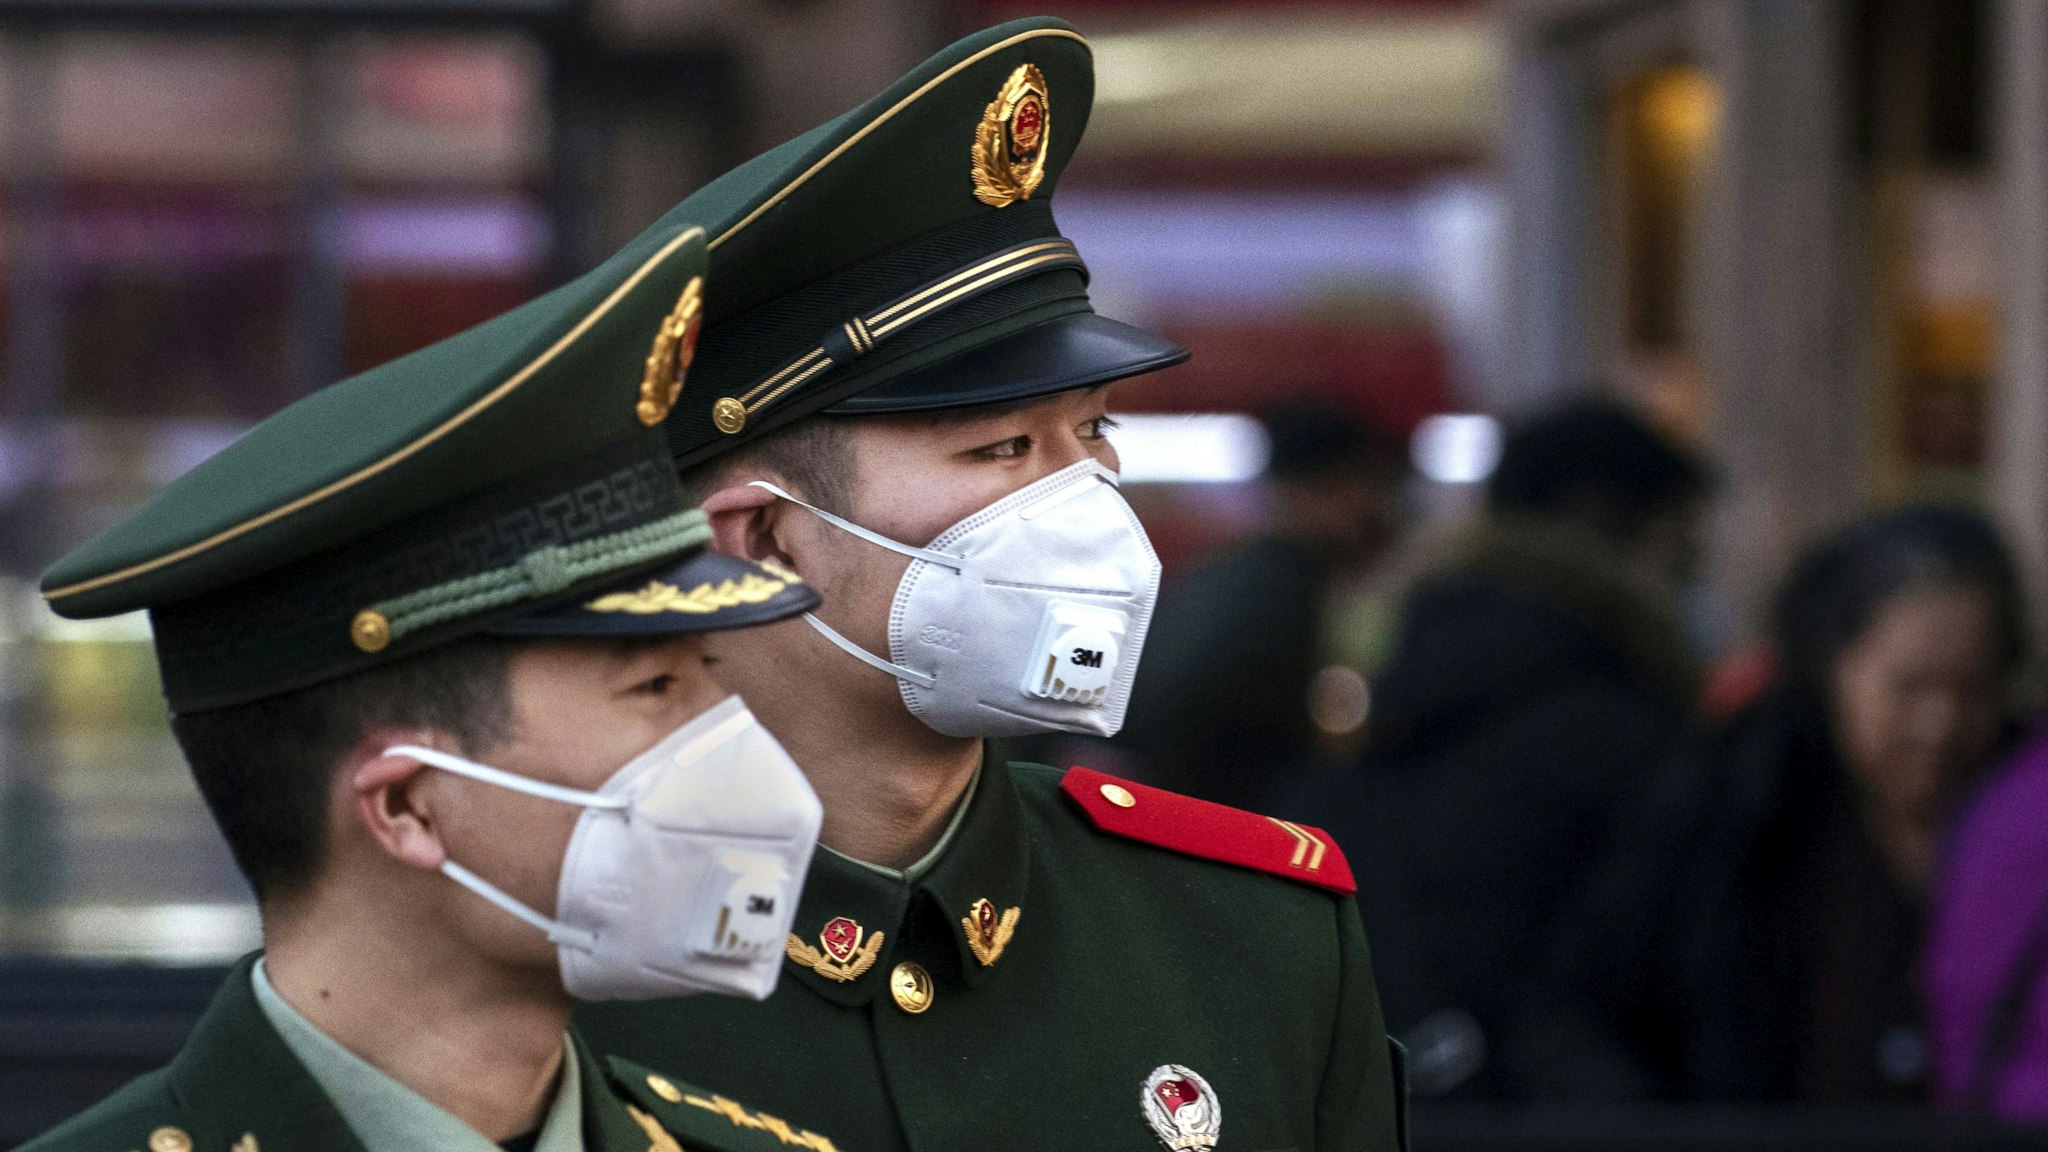 BEIJING, CHINA - JANUARY 22: Chinese police officers wear protective masks at Beijing Station before the annual Spring Festival on January 22, 2020 in Beijing, China. The number of cases of a deadly new coronavirus rose to over 400 in mainland China Wednesday as health officials stepped up efforts to contain the spread of the pneumonia-like disease which medicals experts confirmed can be passed from human to human. The number of those who have died from the virus in China climbed to nine on Wednesday and cases have been reported in other countries including the United States,Thailand, Japan, Taiwan and South Korea.